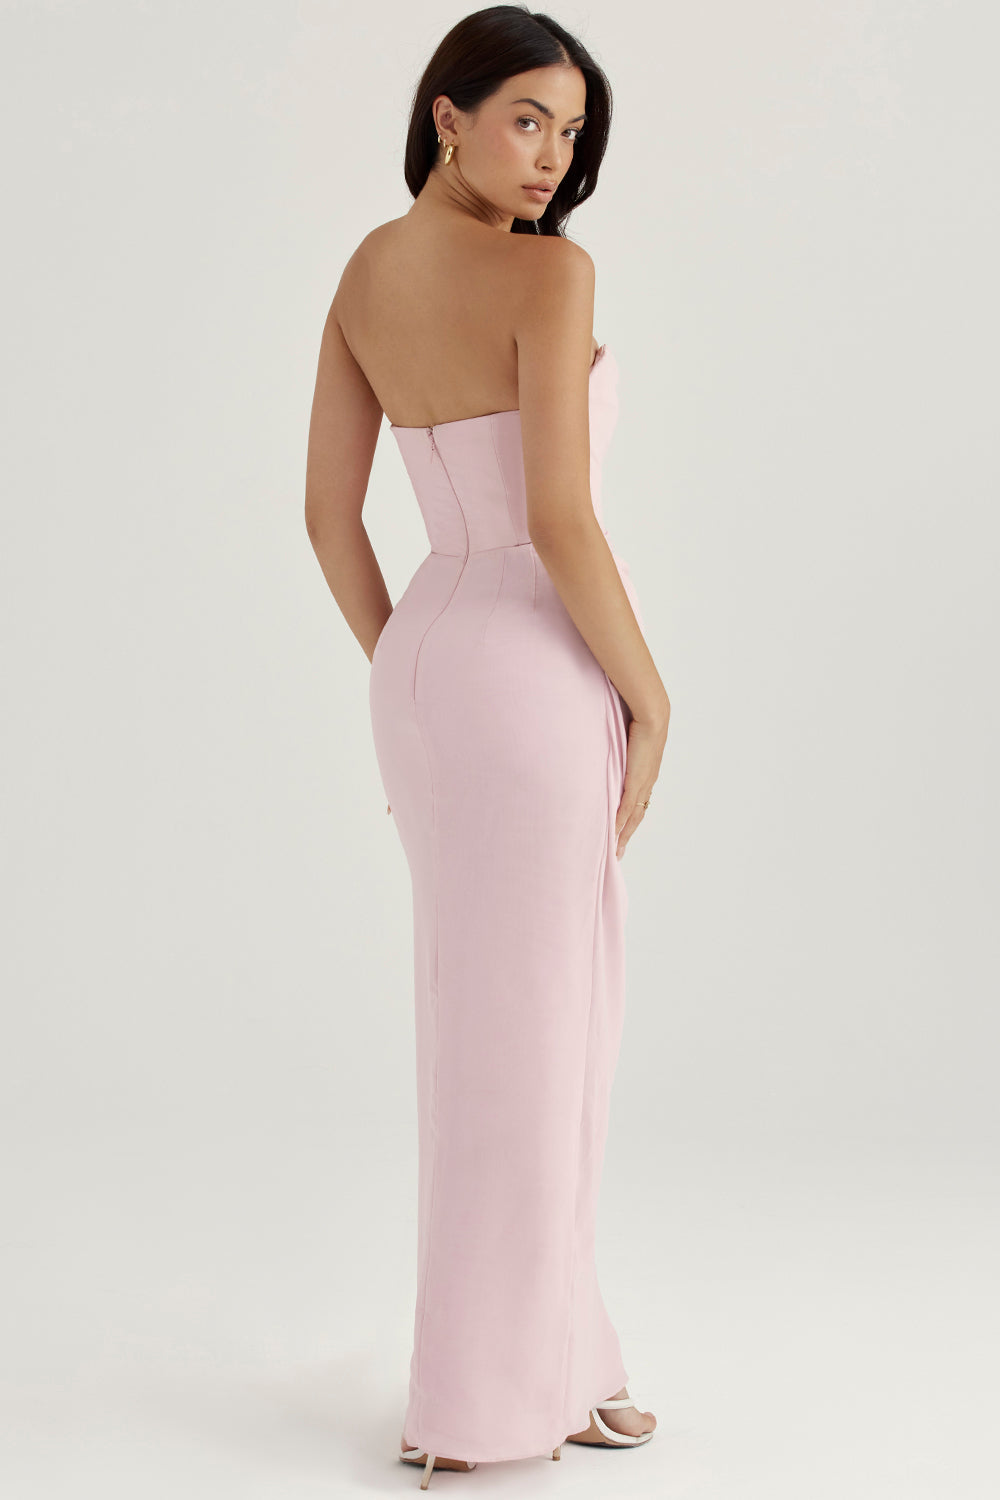 HOUSE OF CB Adrienne Corset Dress (Pink)